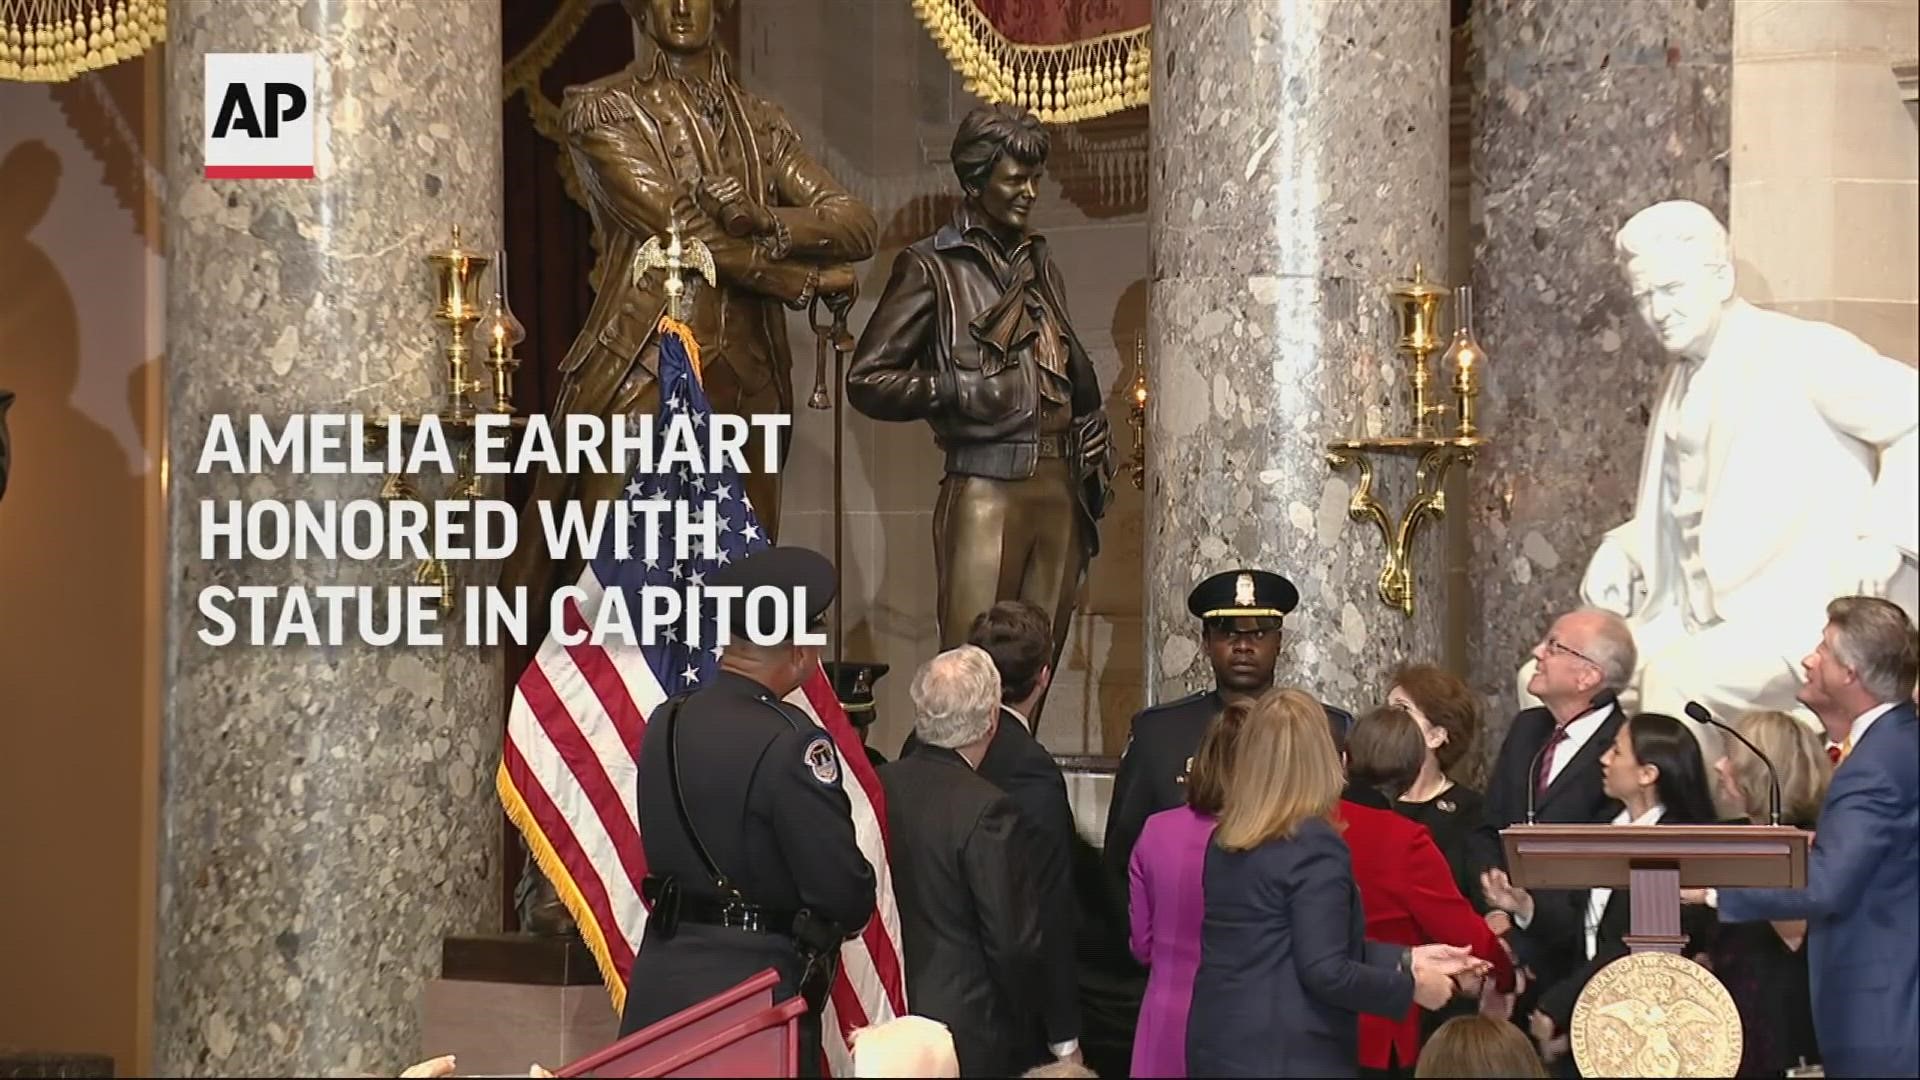 House Speaker Nancy Pelosi unveiled a new statue in the Capitol to honor pioneer aviator Amelia Earhart.